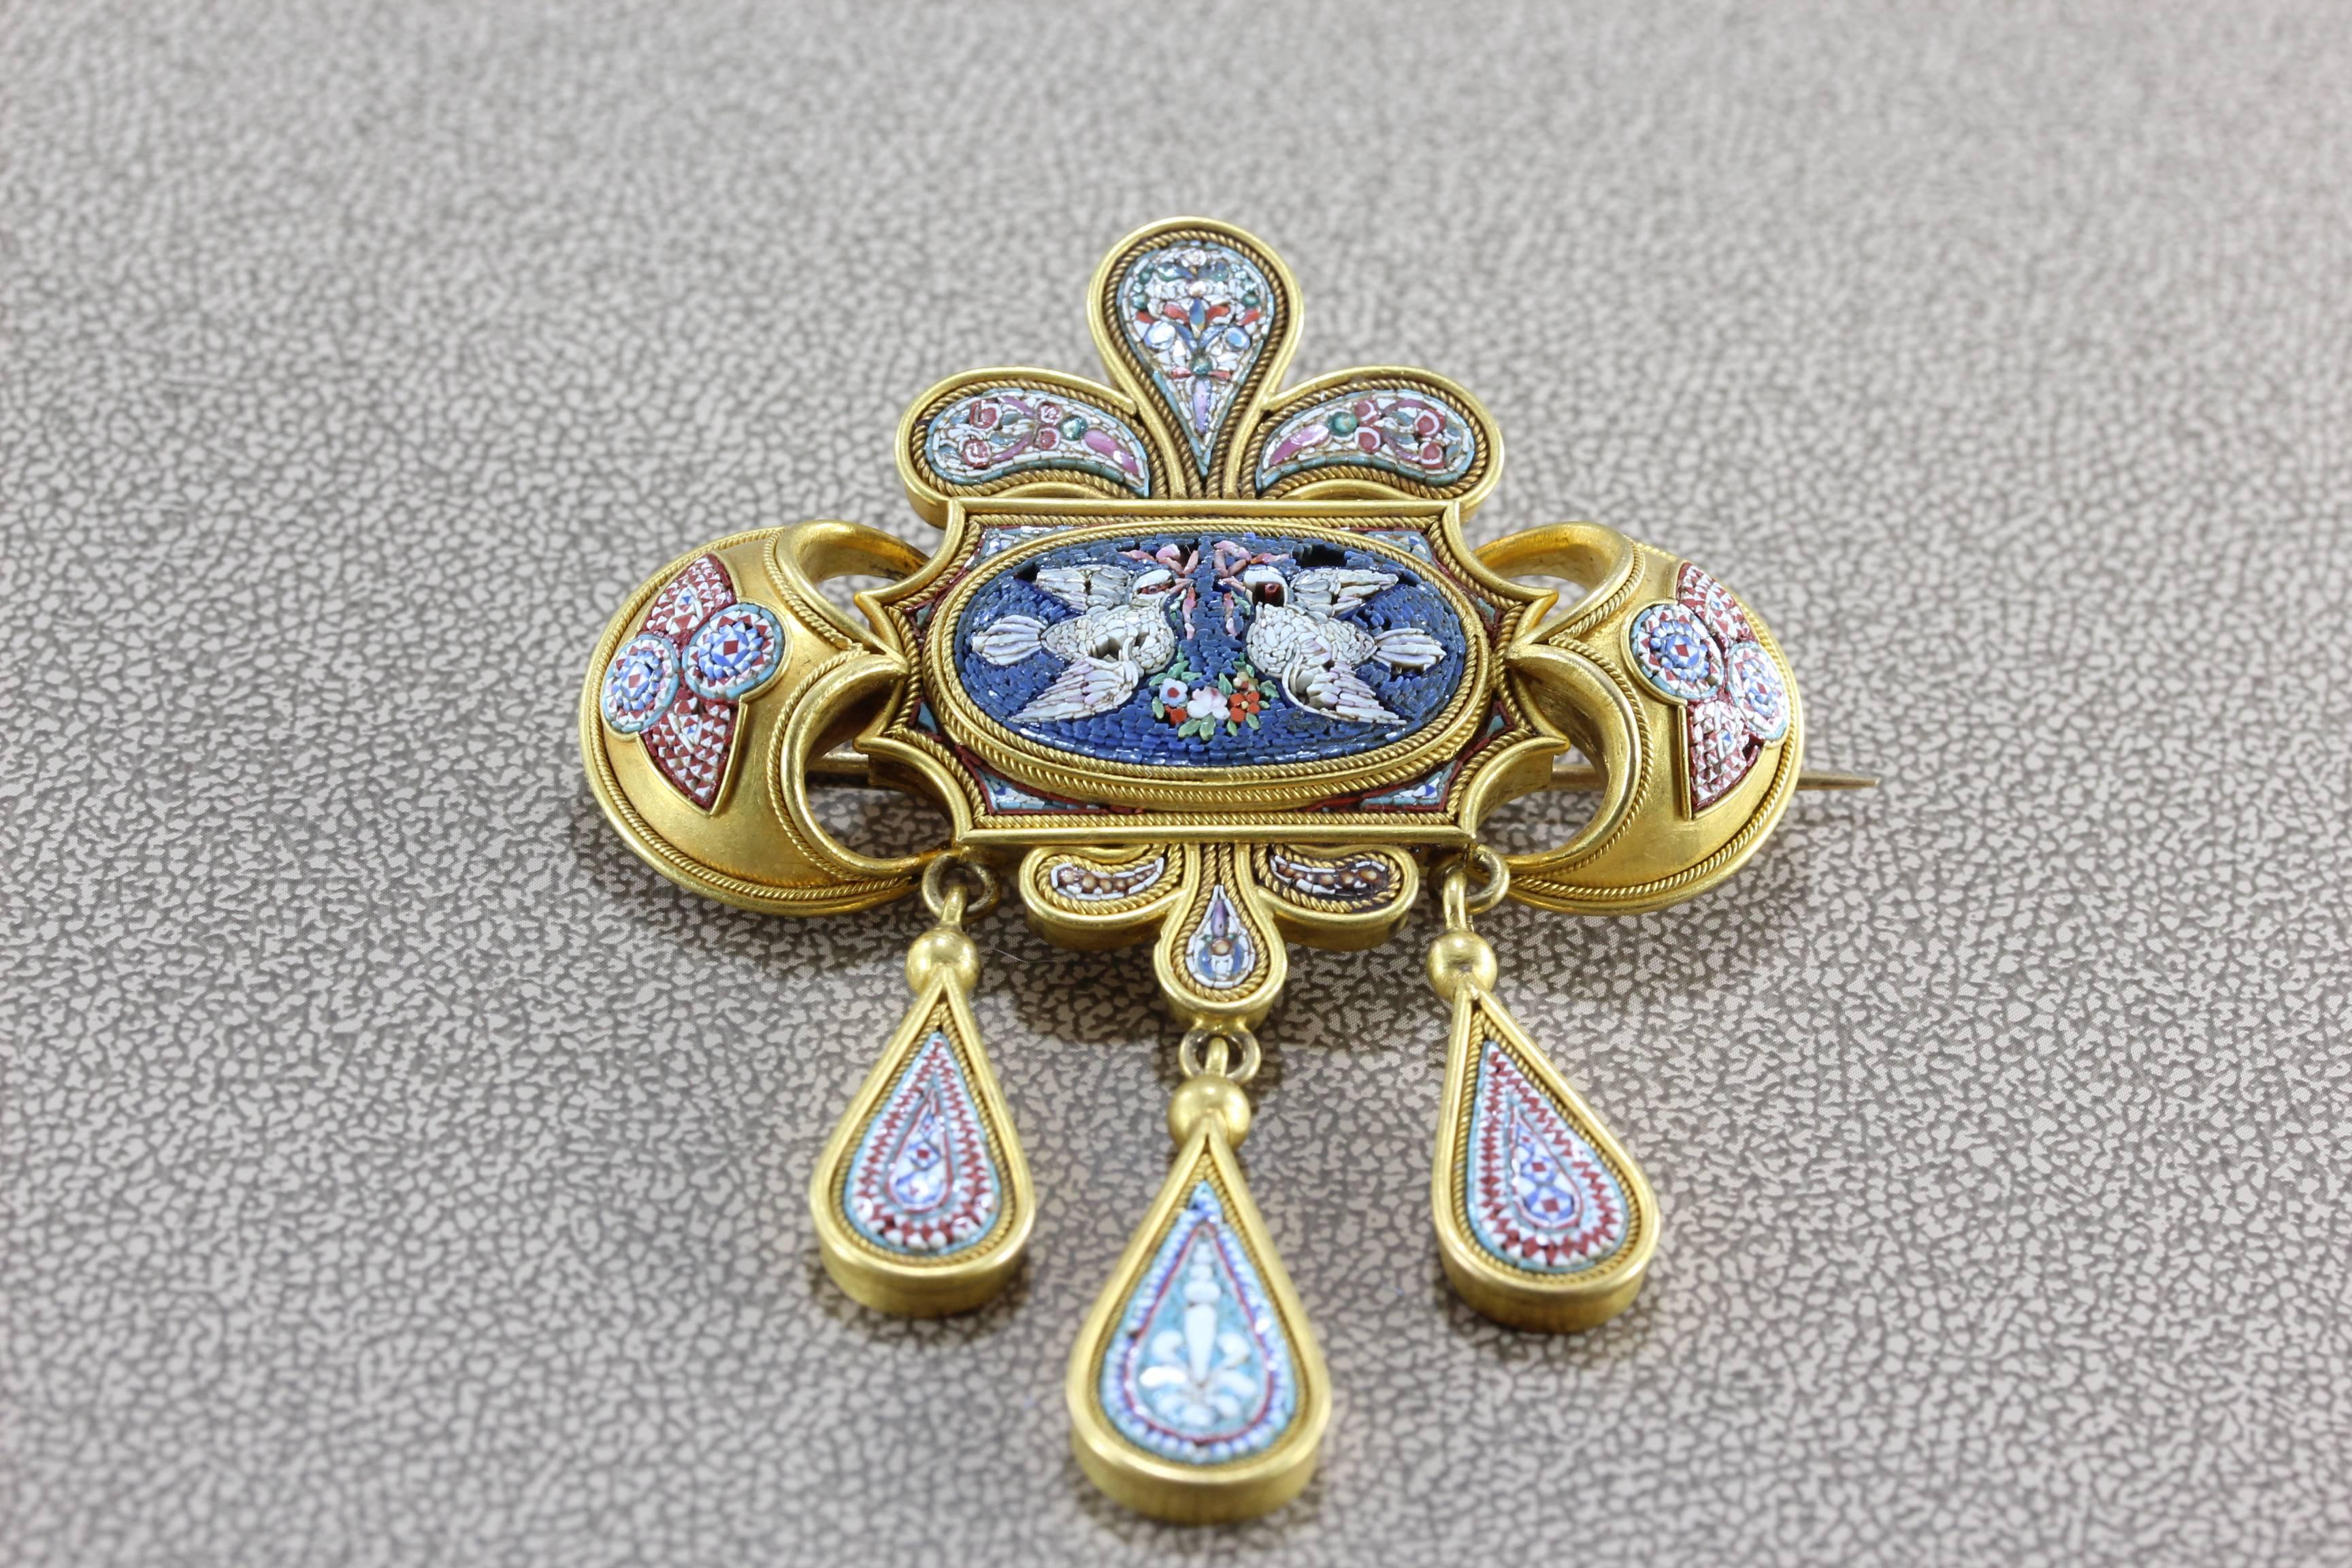 A lovely example of micro-mosaic work mastered in Rome during the mid-19th century. Colorful and highly detailed, this brooch depicts two doves coming together to make a home. Over a thousand pieces of mosaic were used to craft this intricate and